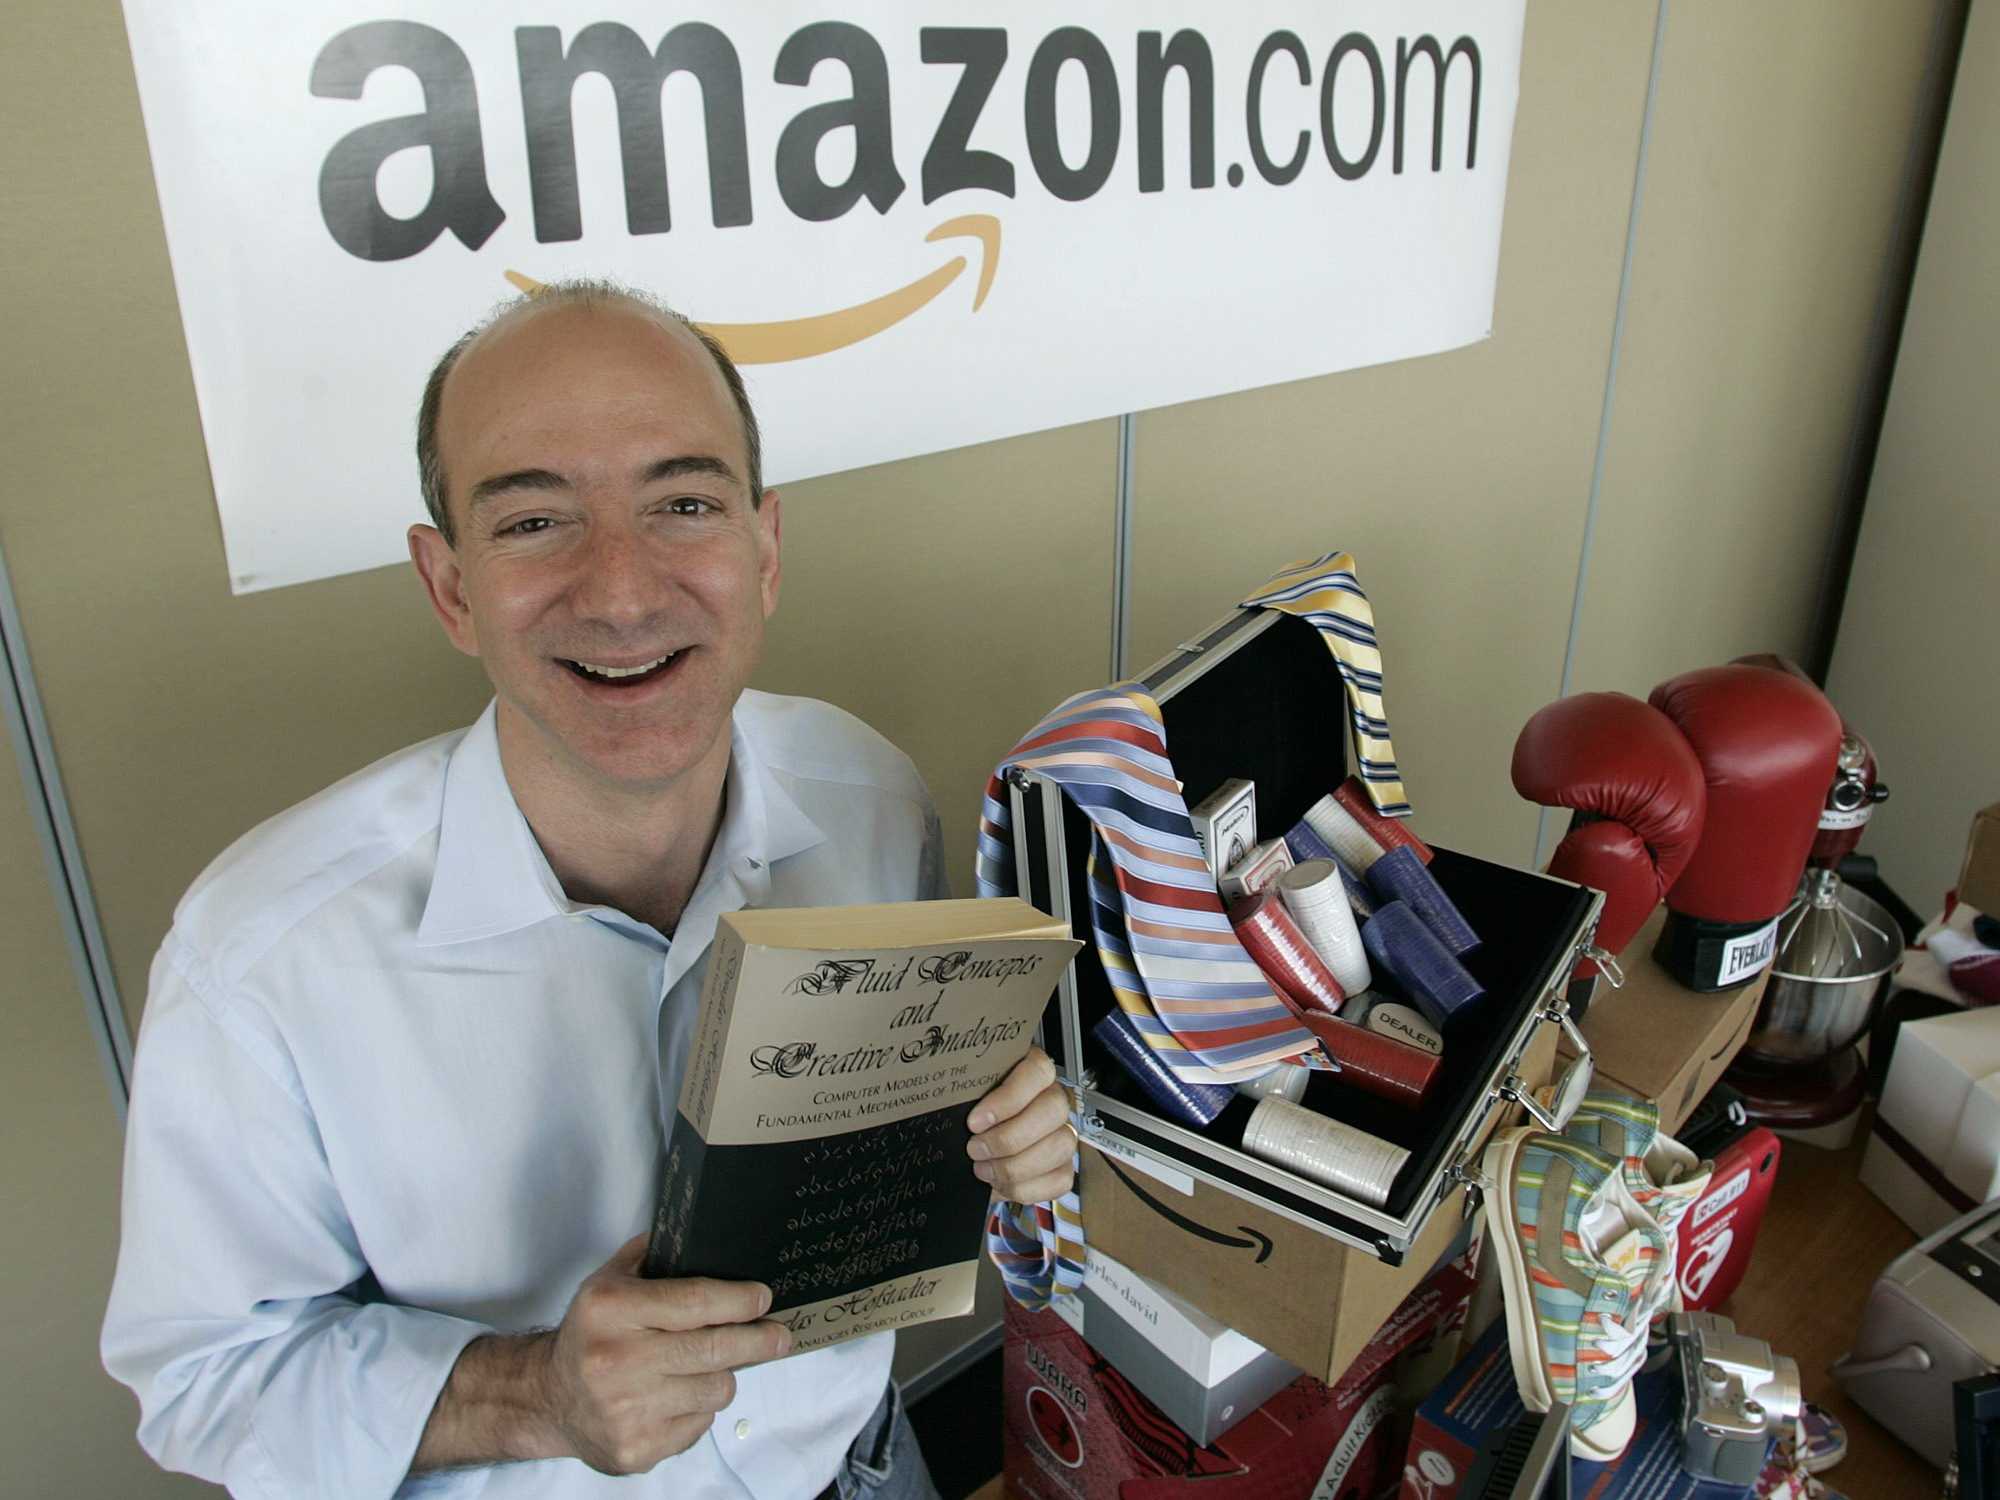 Is this the future of work? Jeff Bezos and the Amazon Way